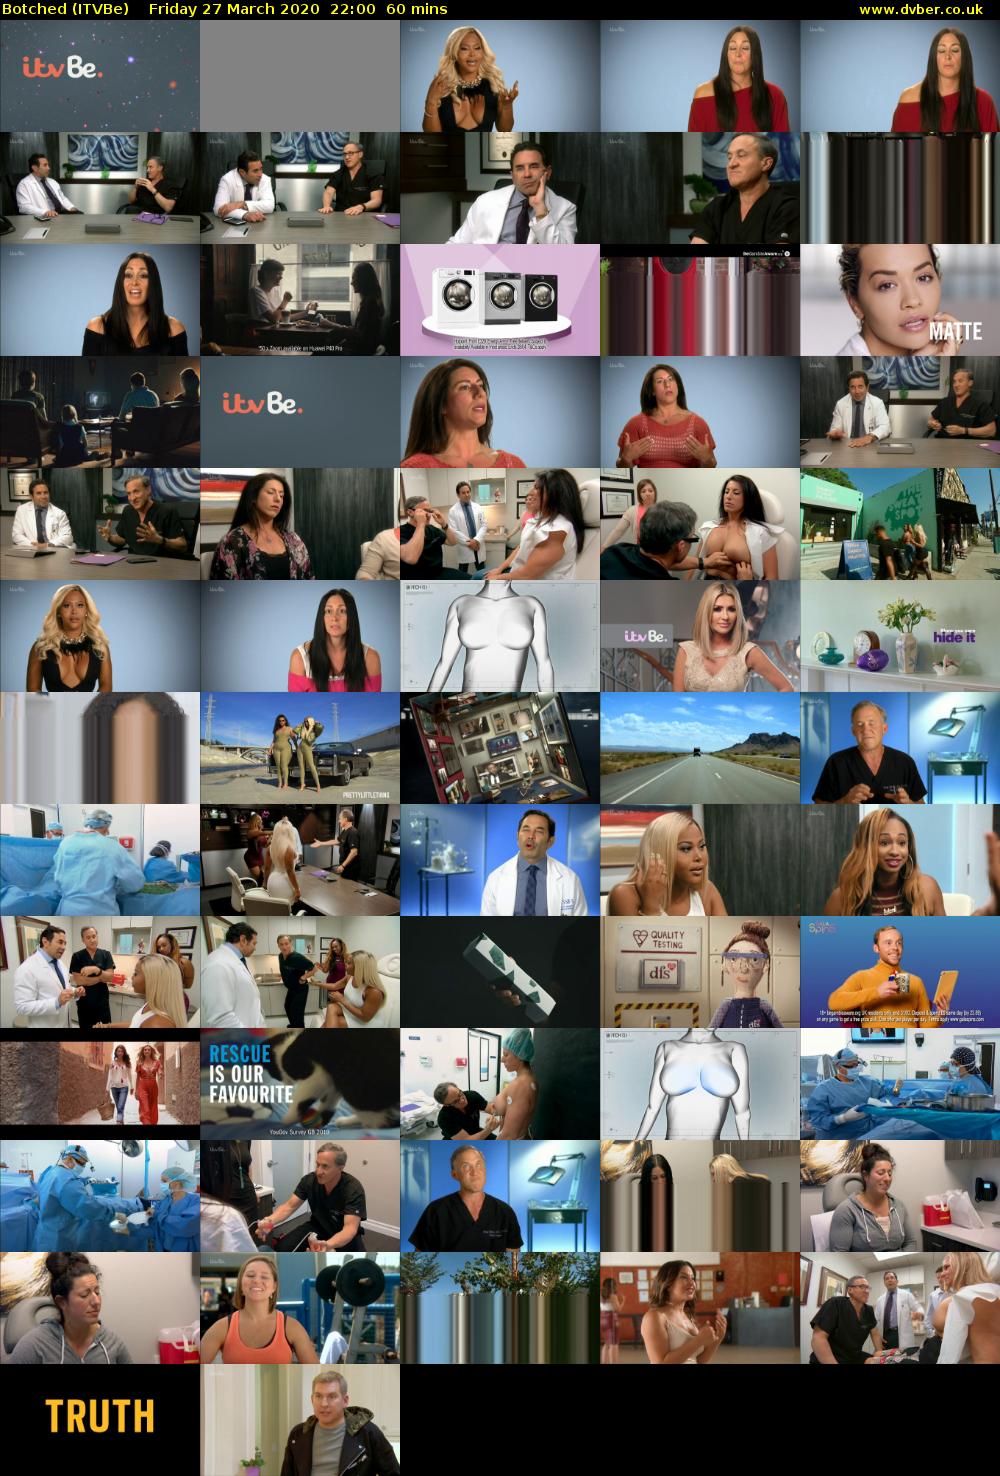 Botched (ITVBe) Friday 27 March 2020 22:00 - 23:00